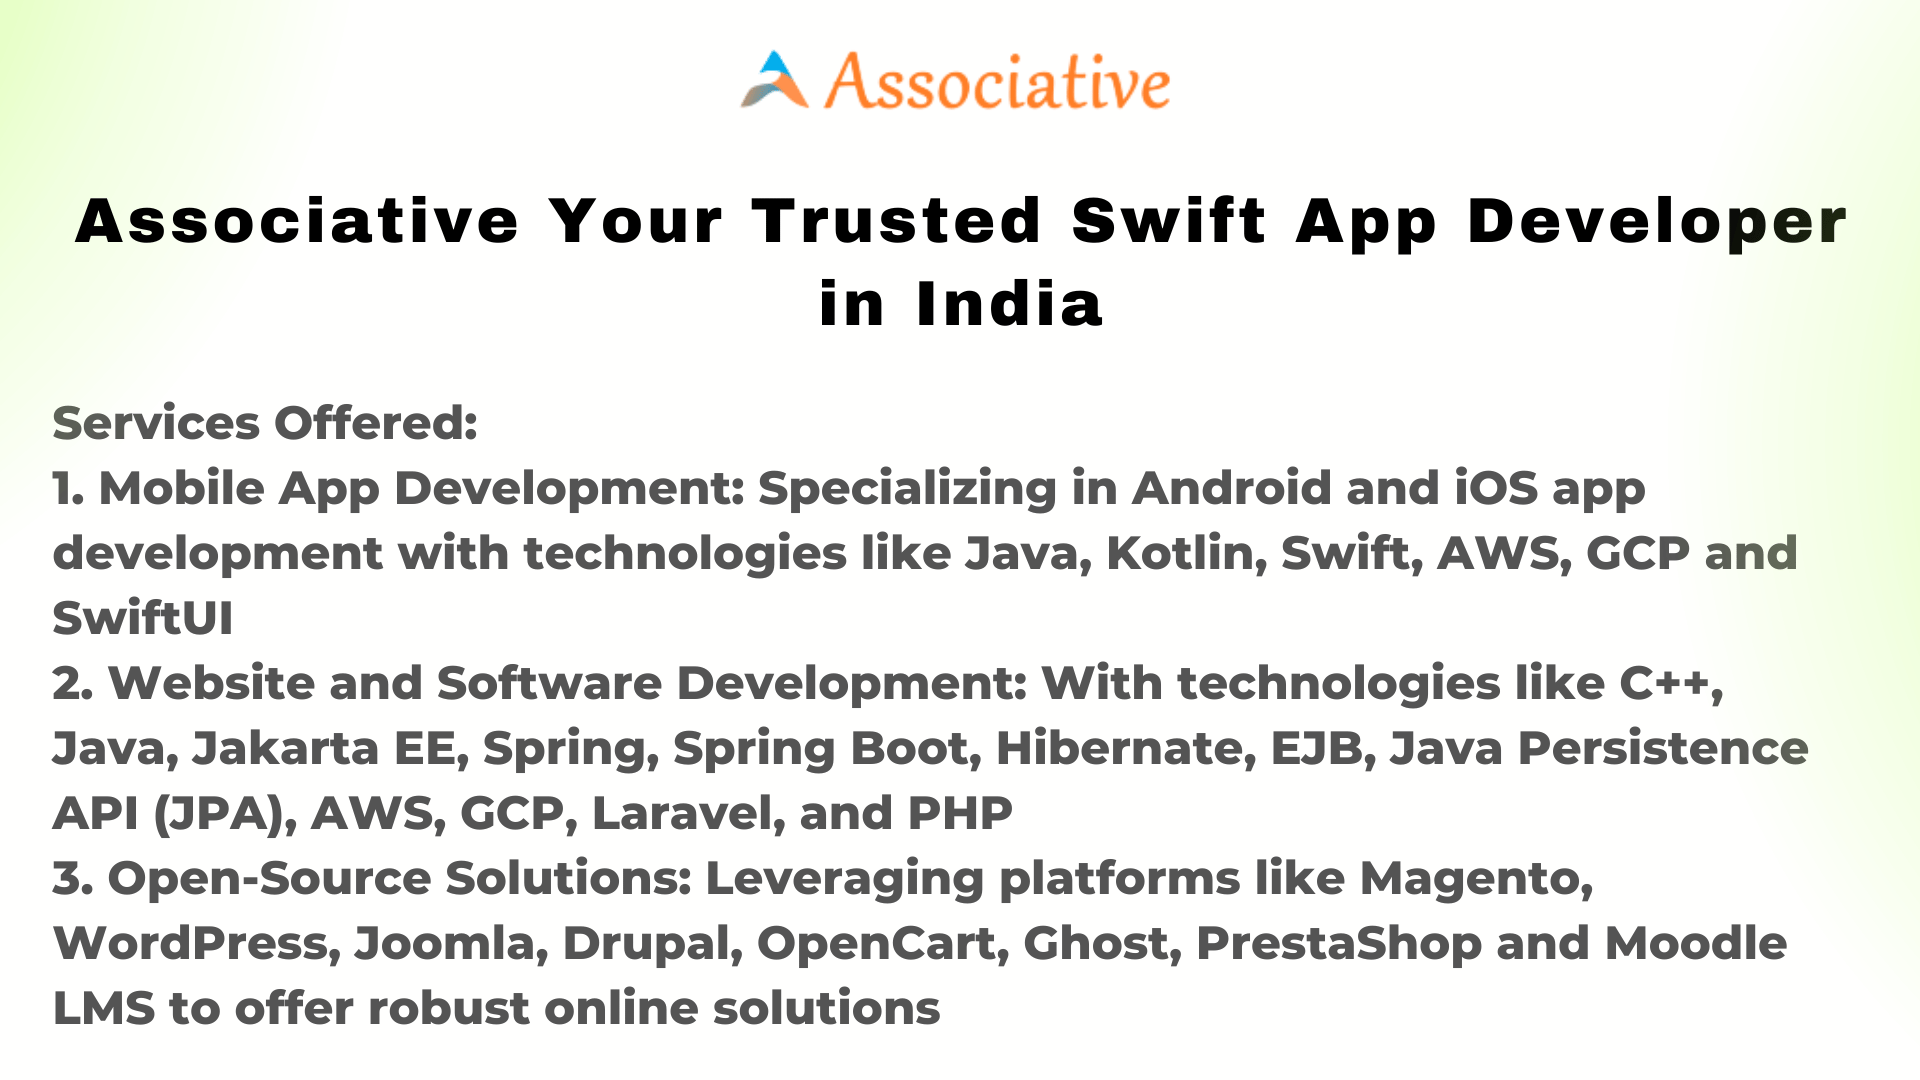 Associative Your Trusted Swift App Developer in India